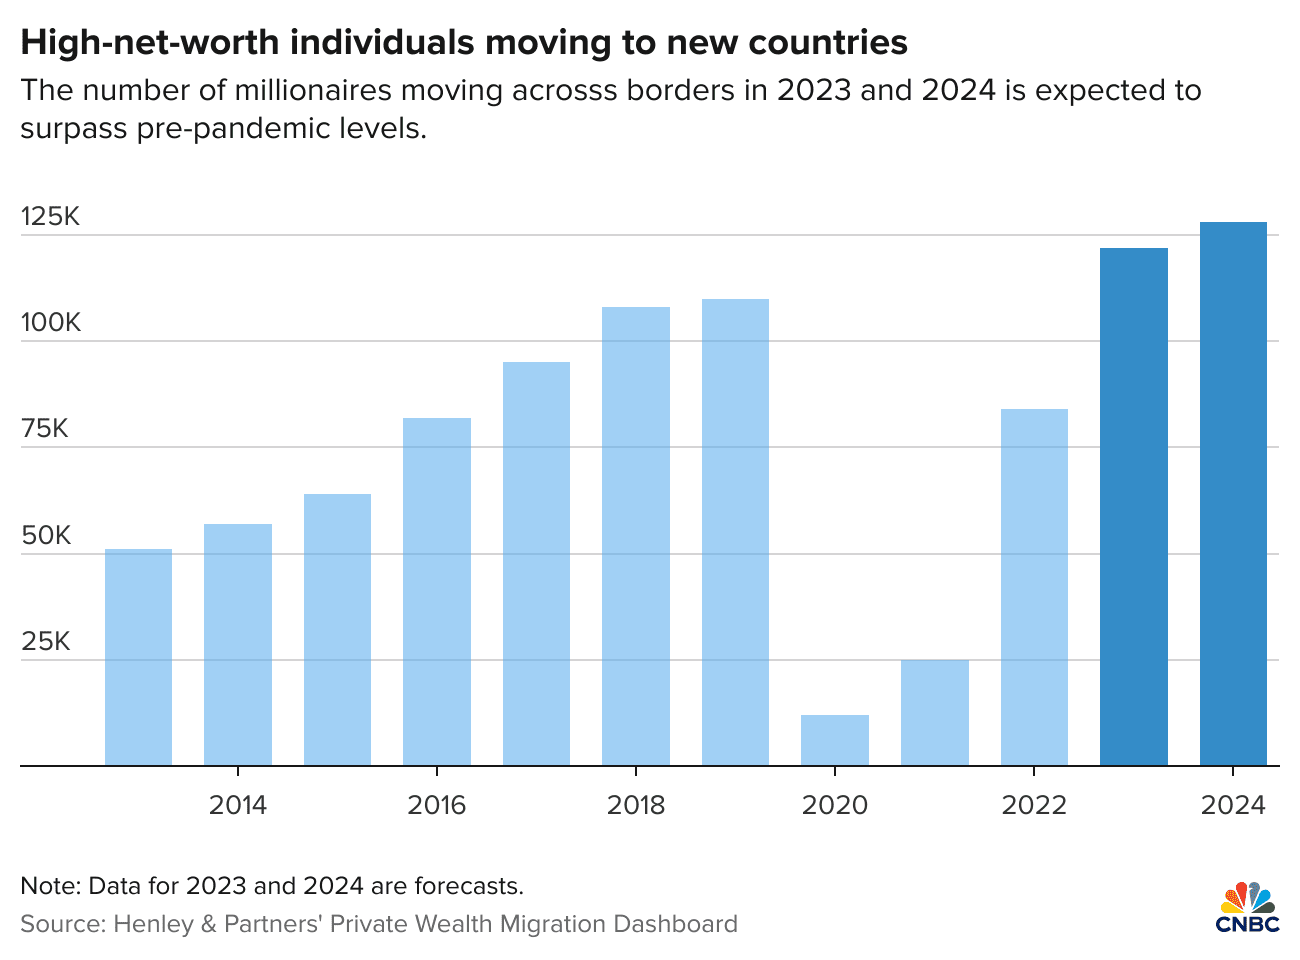 High-net-worth individuals moving to new countries